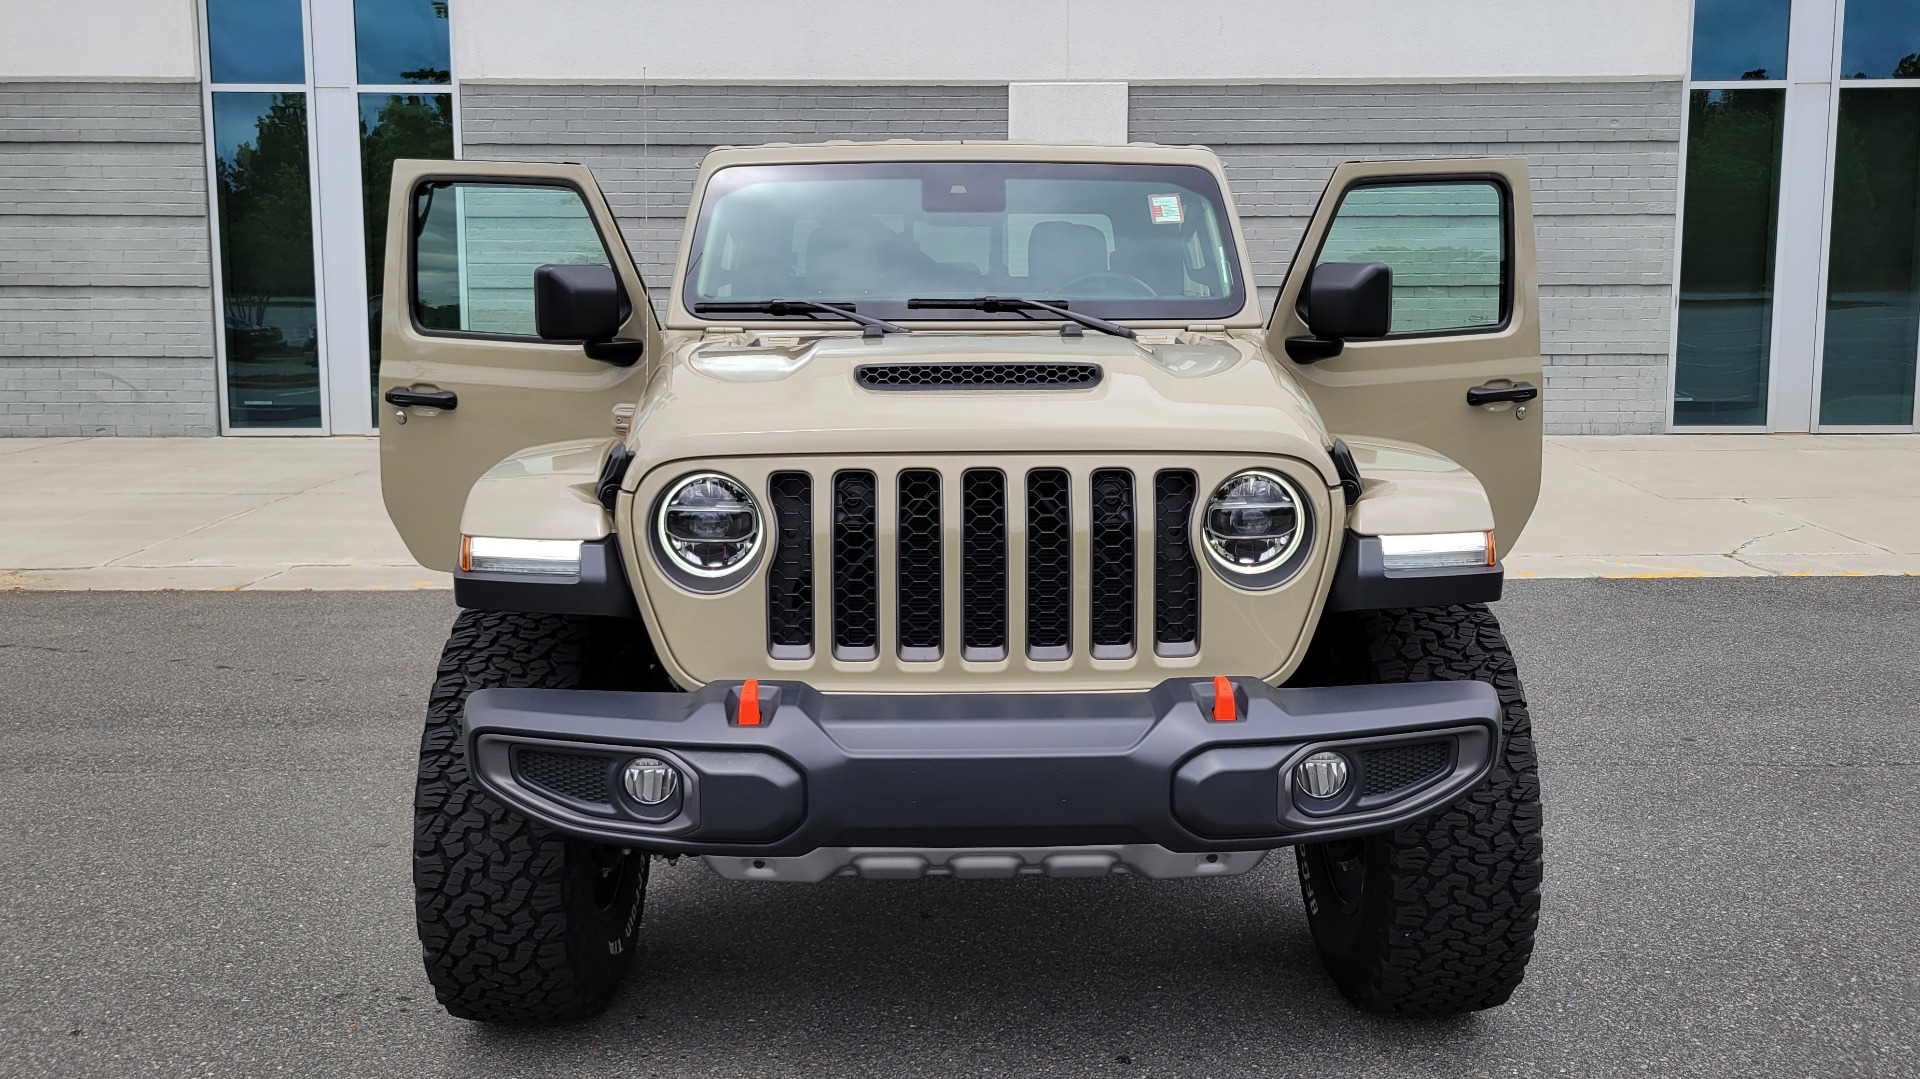 Used 2020 Jeep GLADIATOR MOJAVE 4X4 / 3.6L / AUTO / NAV / COLOR HARD-TOP / ALPINE / REARVIEW for sale $58,995 at Formula Imports in Charlotte NC 28227 56